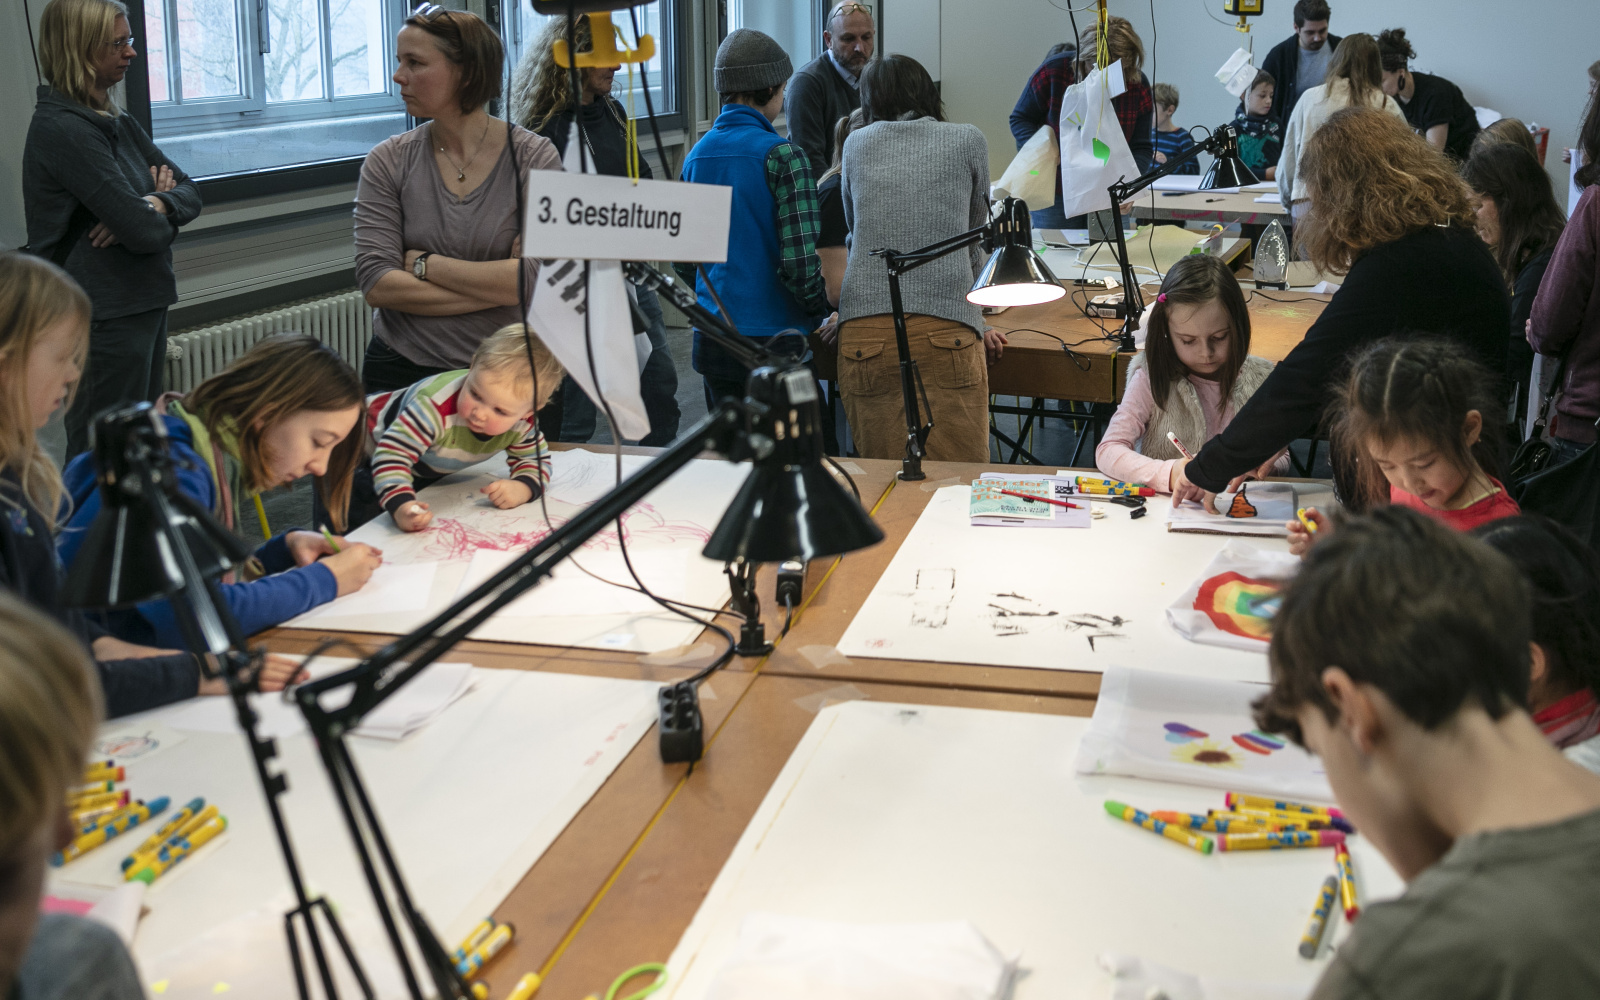 Many children paint at the table during a workshop.